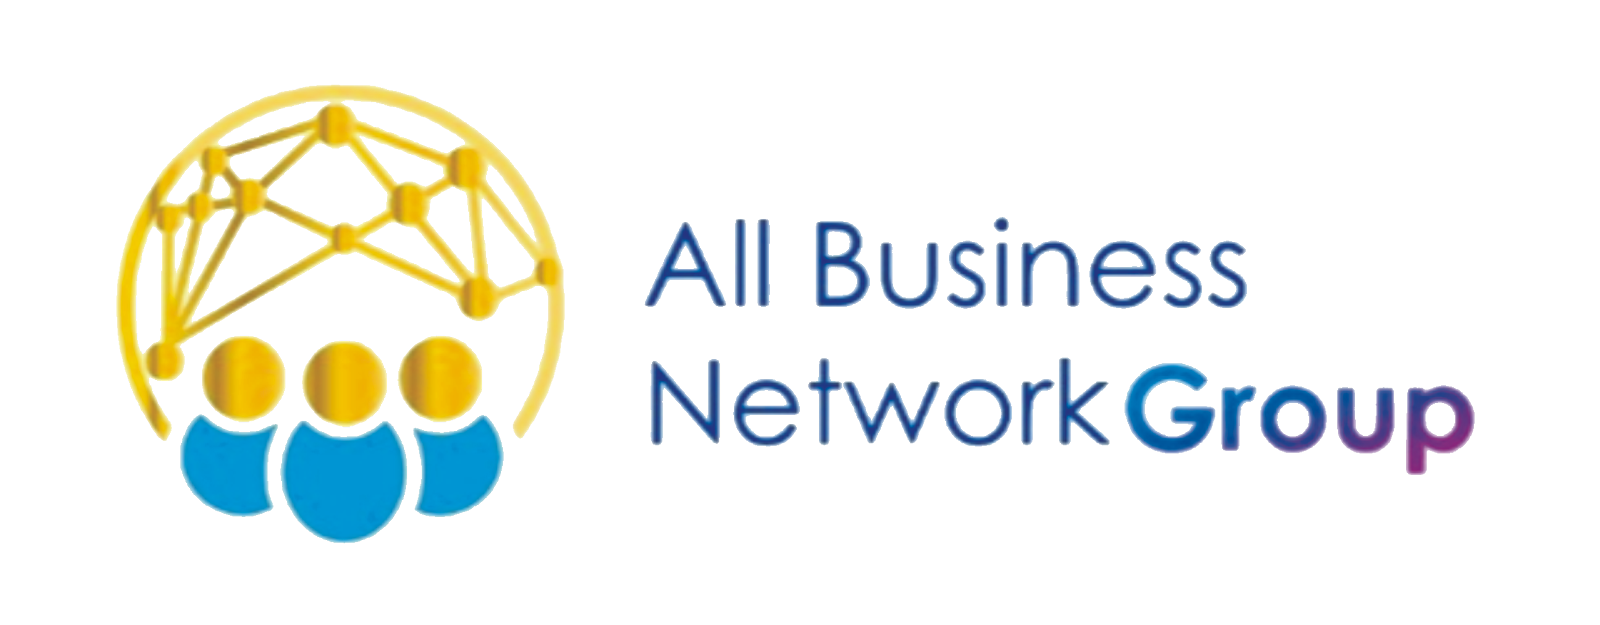 All Business Network Group